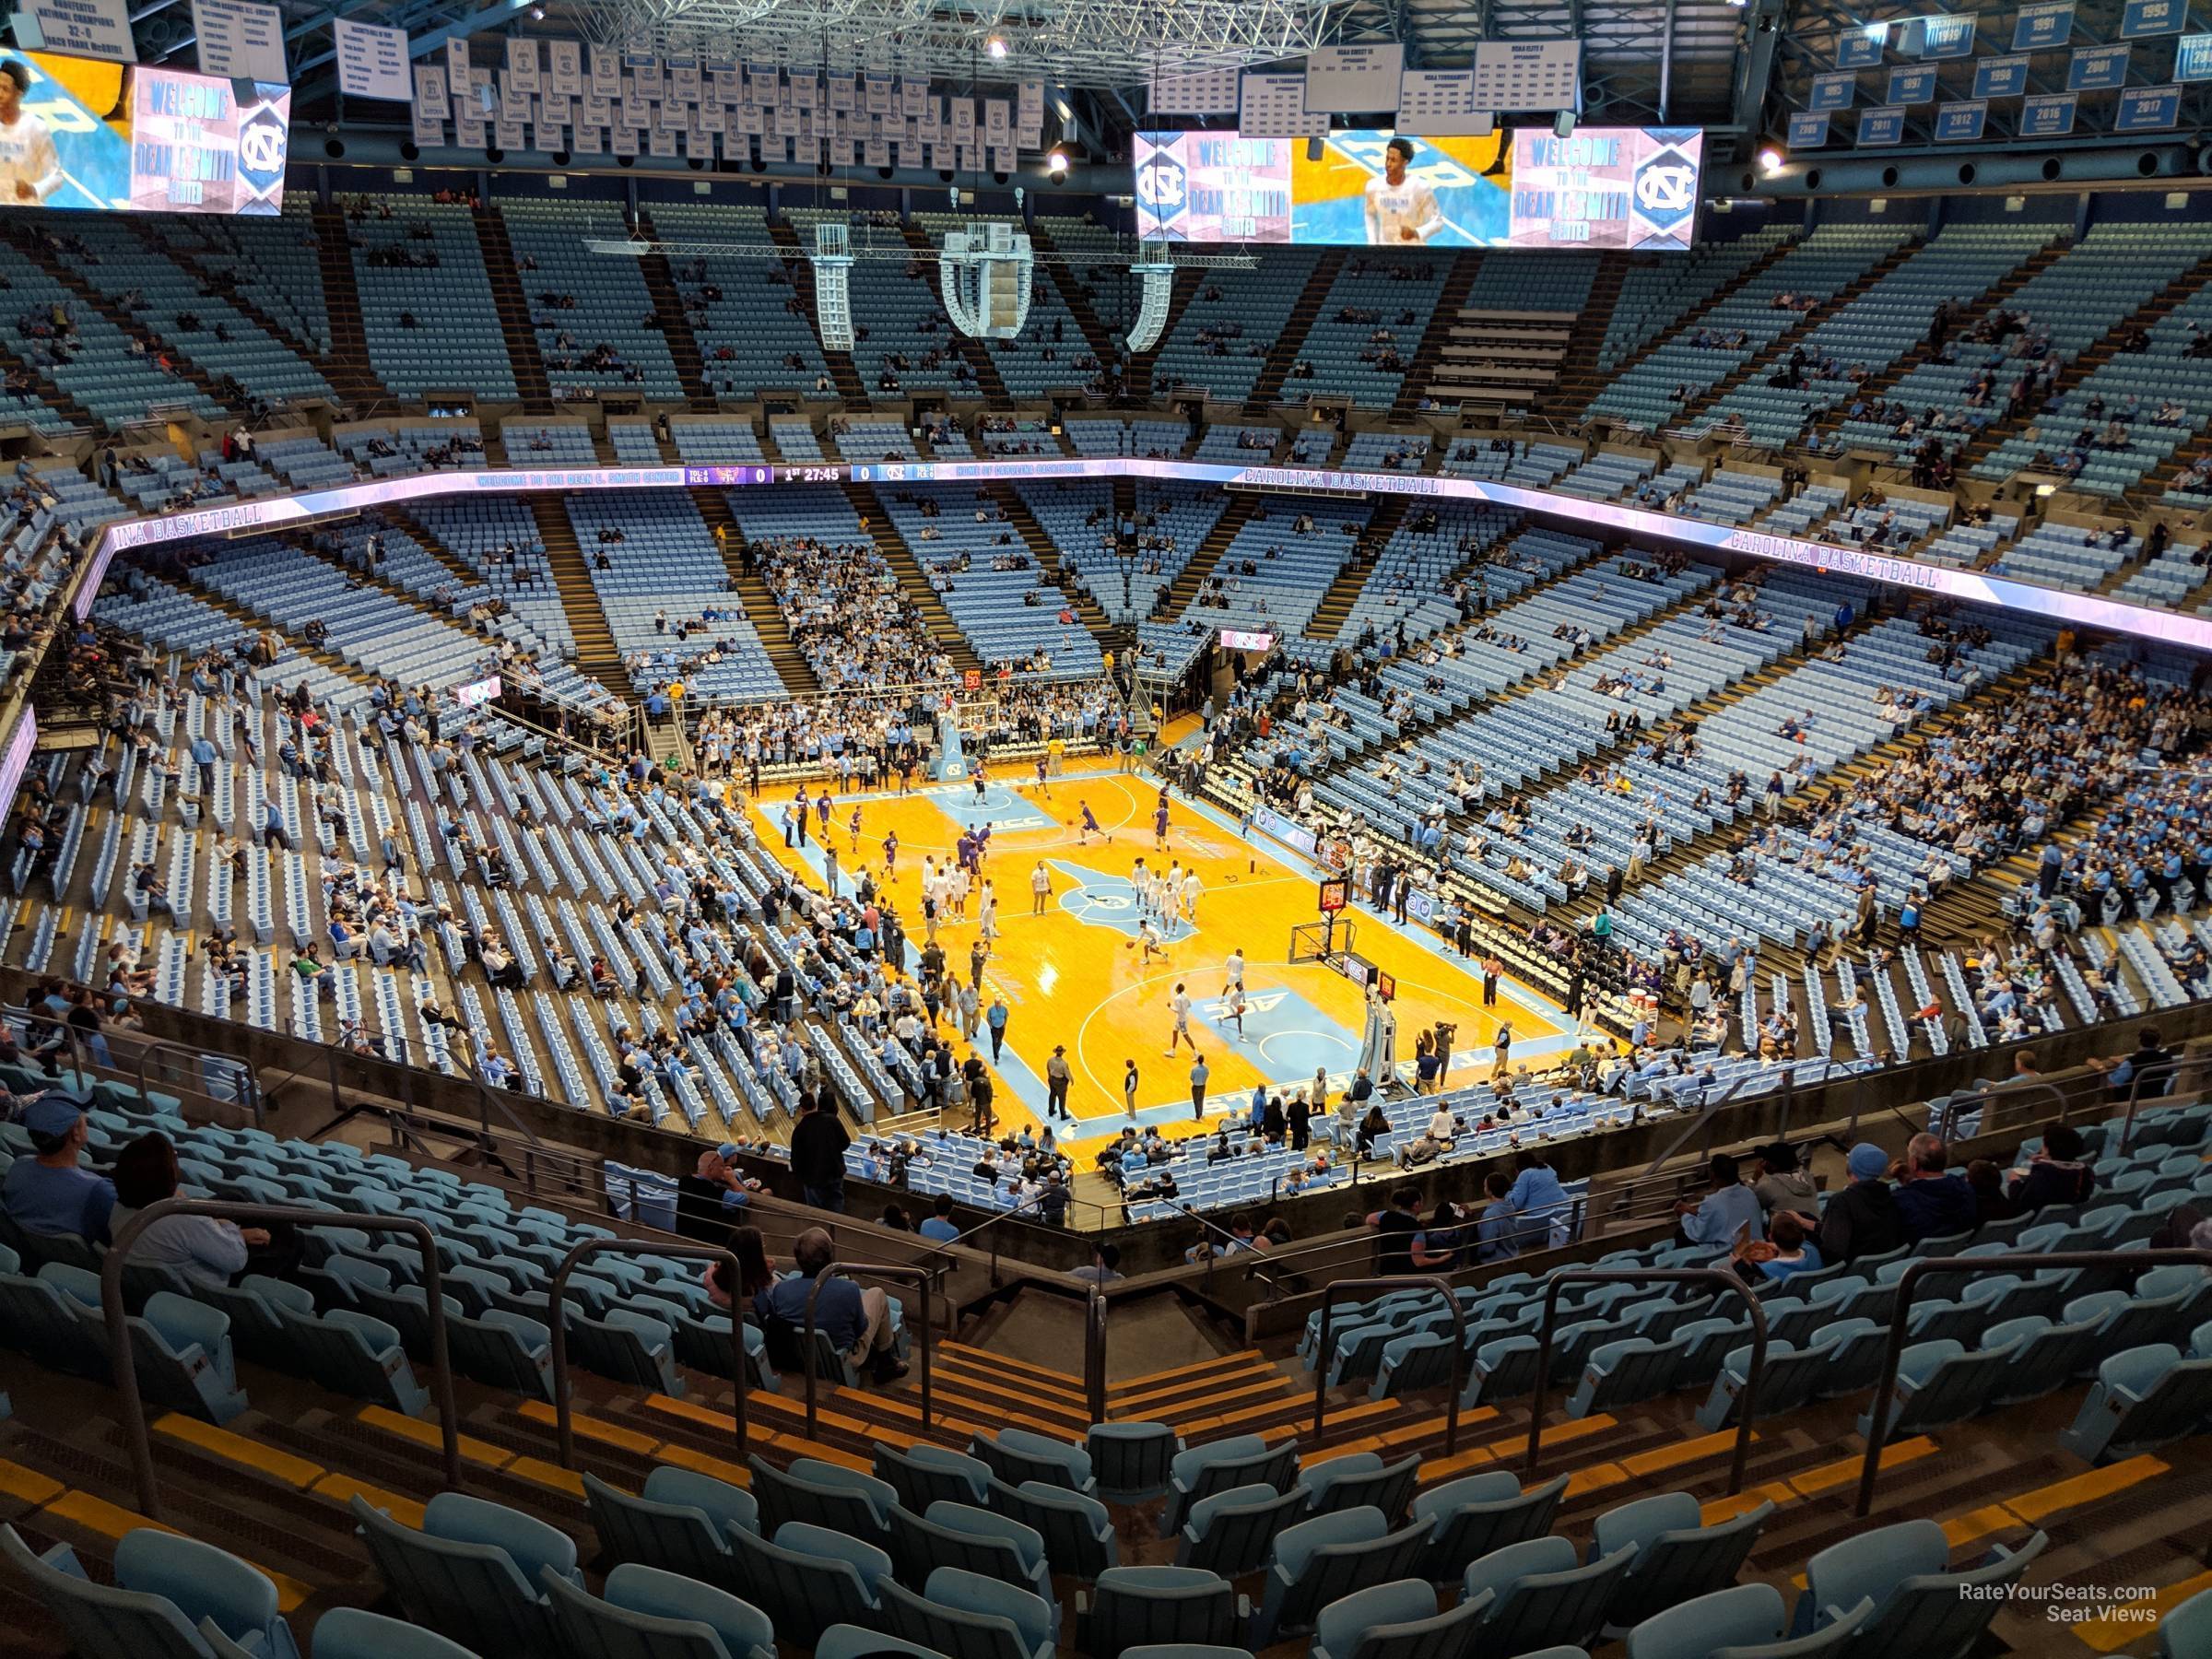 section 231a, row s seat view  - dean smith center